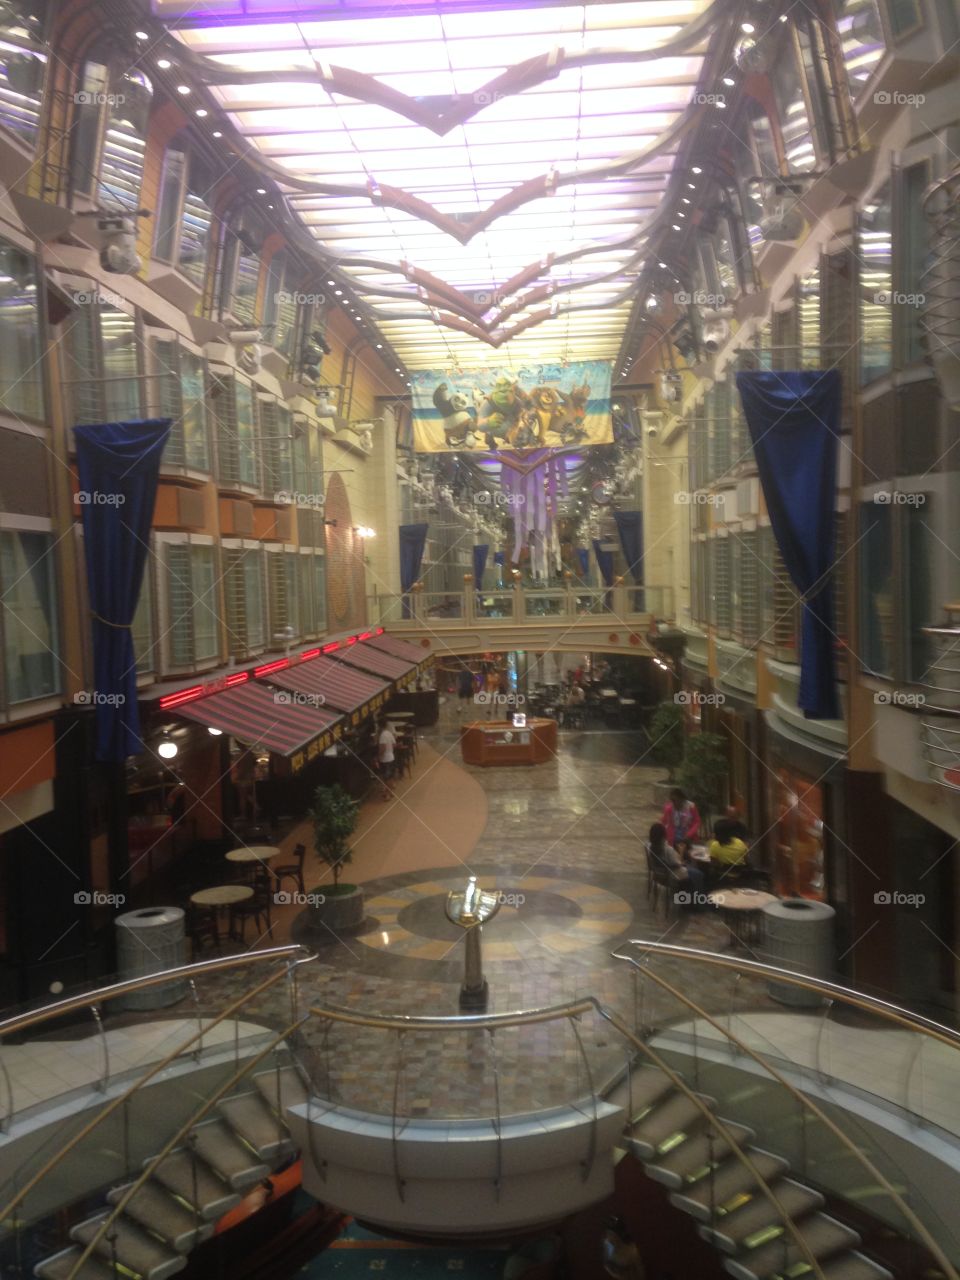 Royal Promenade . Took this onboard the Liberty of the Seas